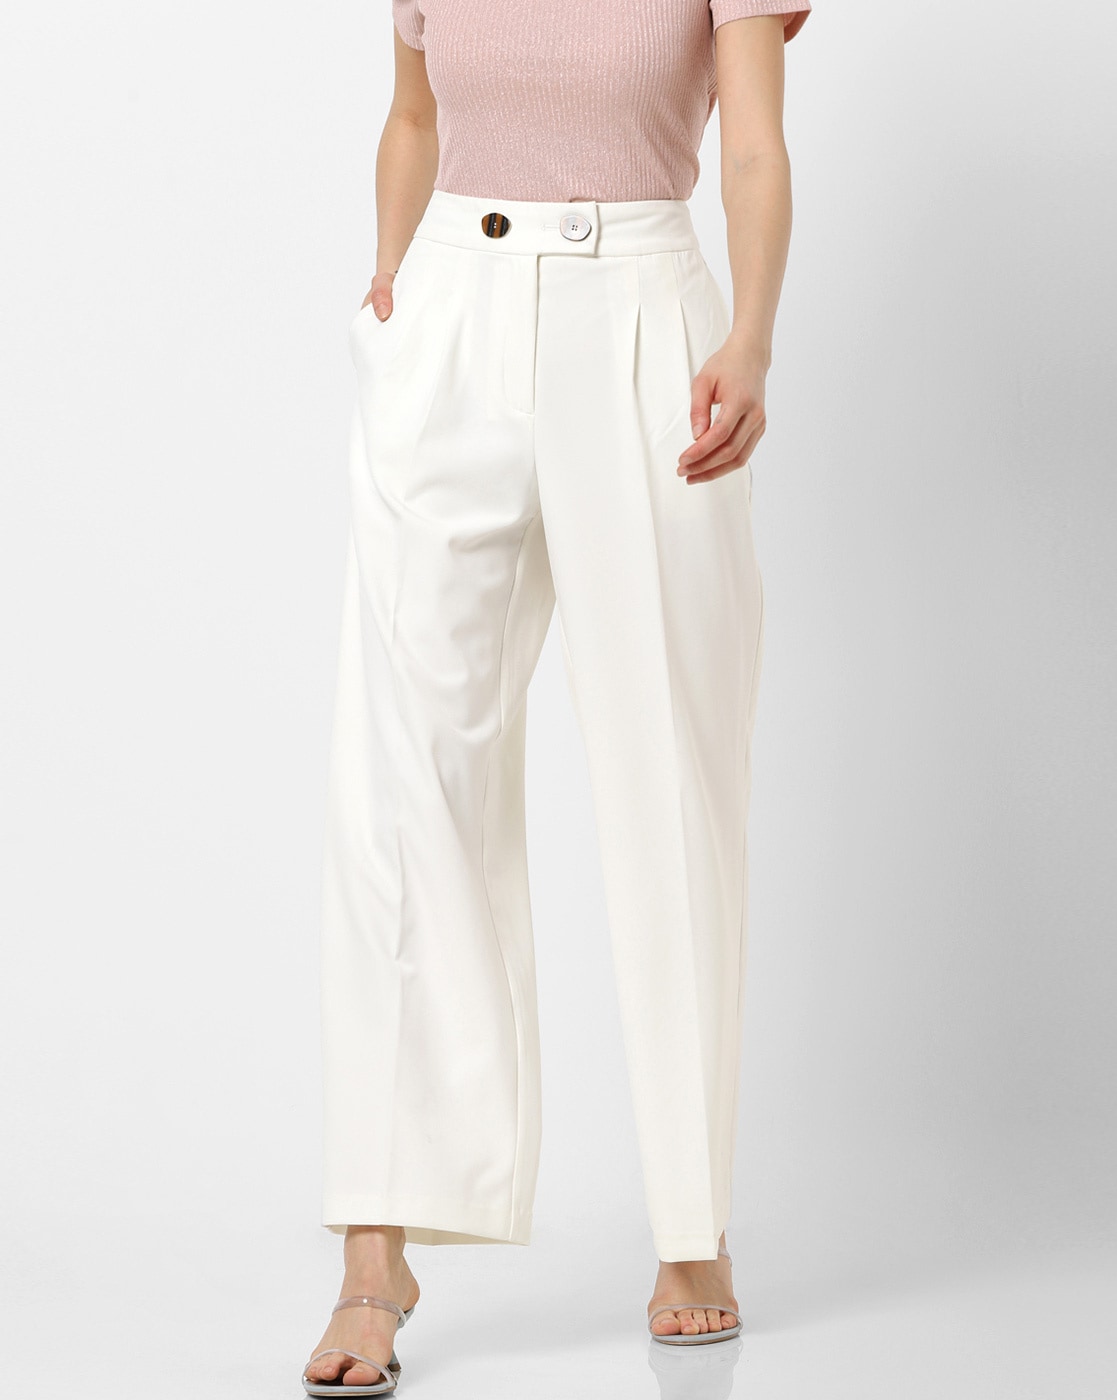 White High Waisted Pleated Pants – Livin' on Dreams Boutique